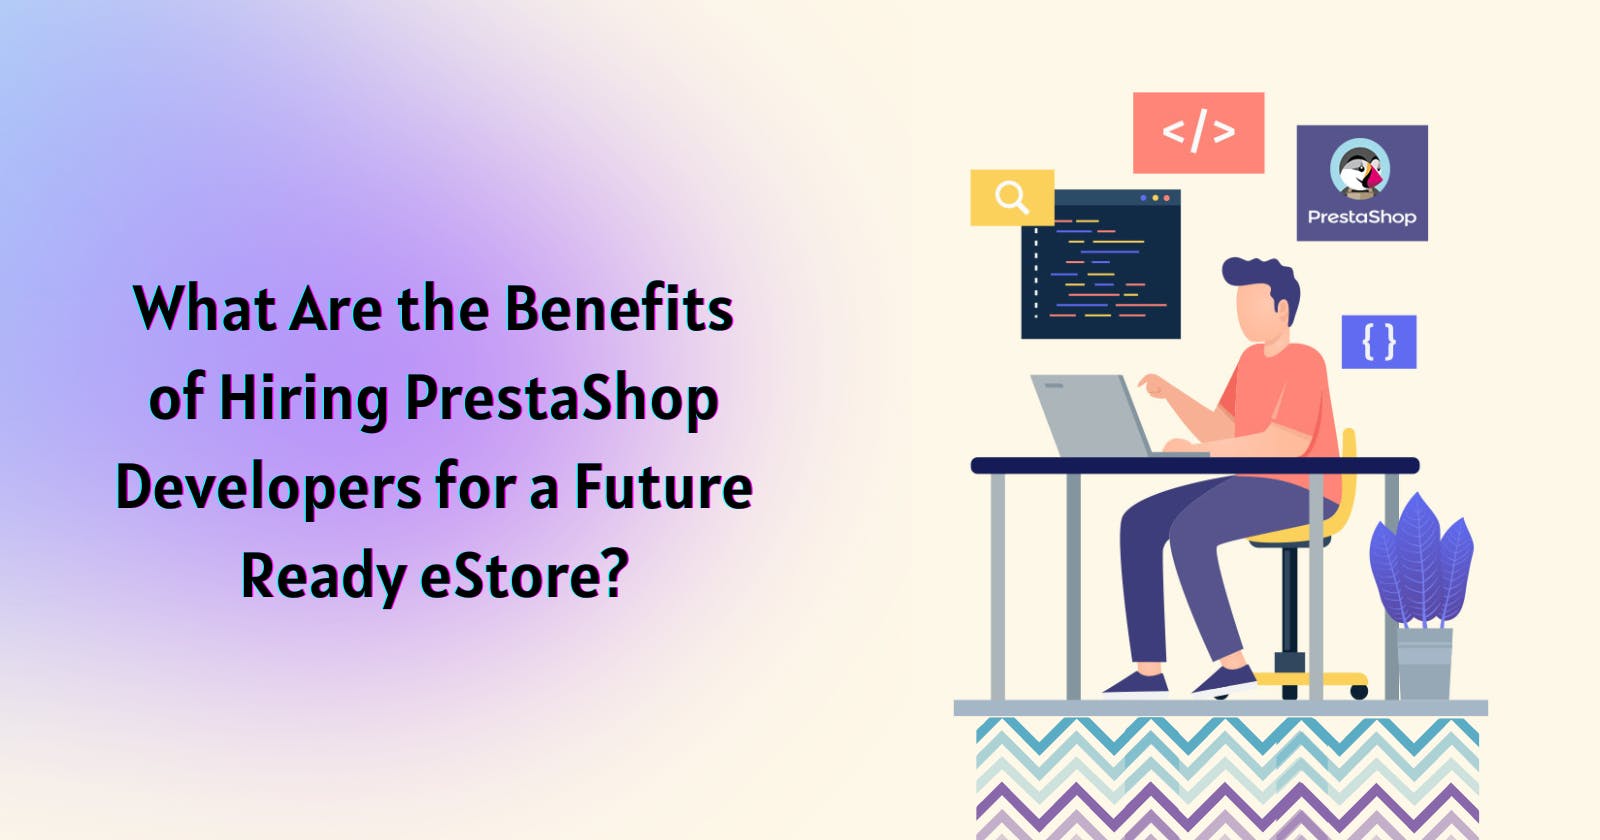 What Are the Benefits of Hiring PrestaShop Developers for a Future Ready eStore?